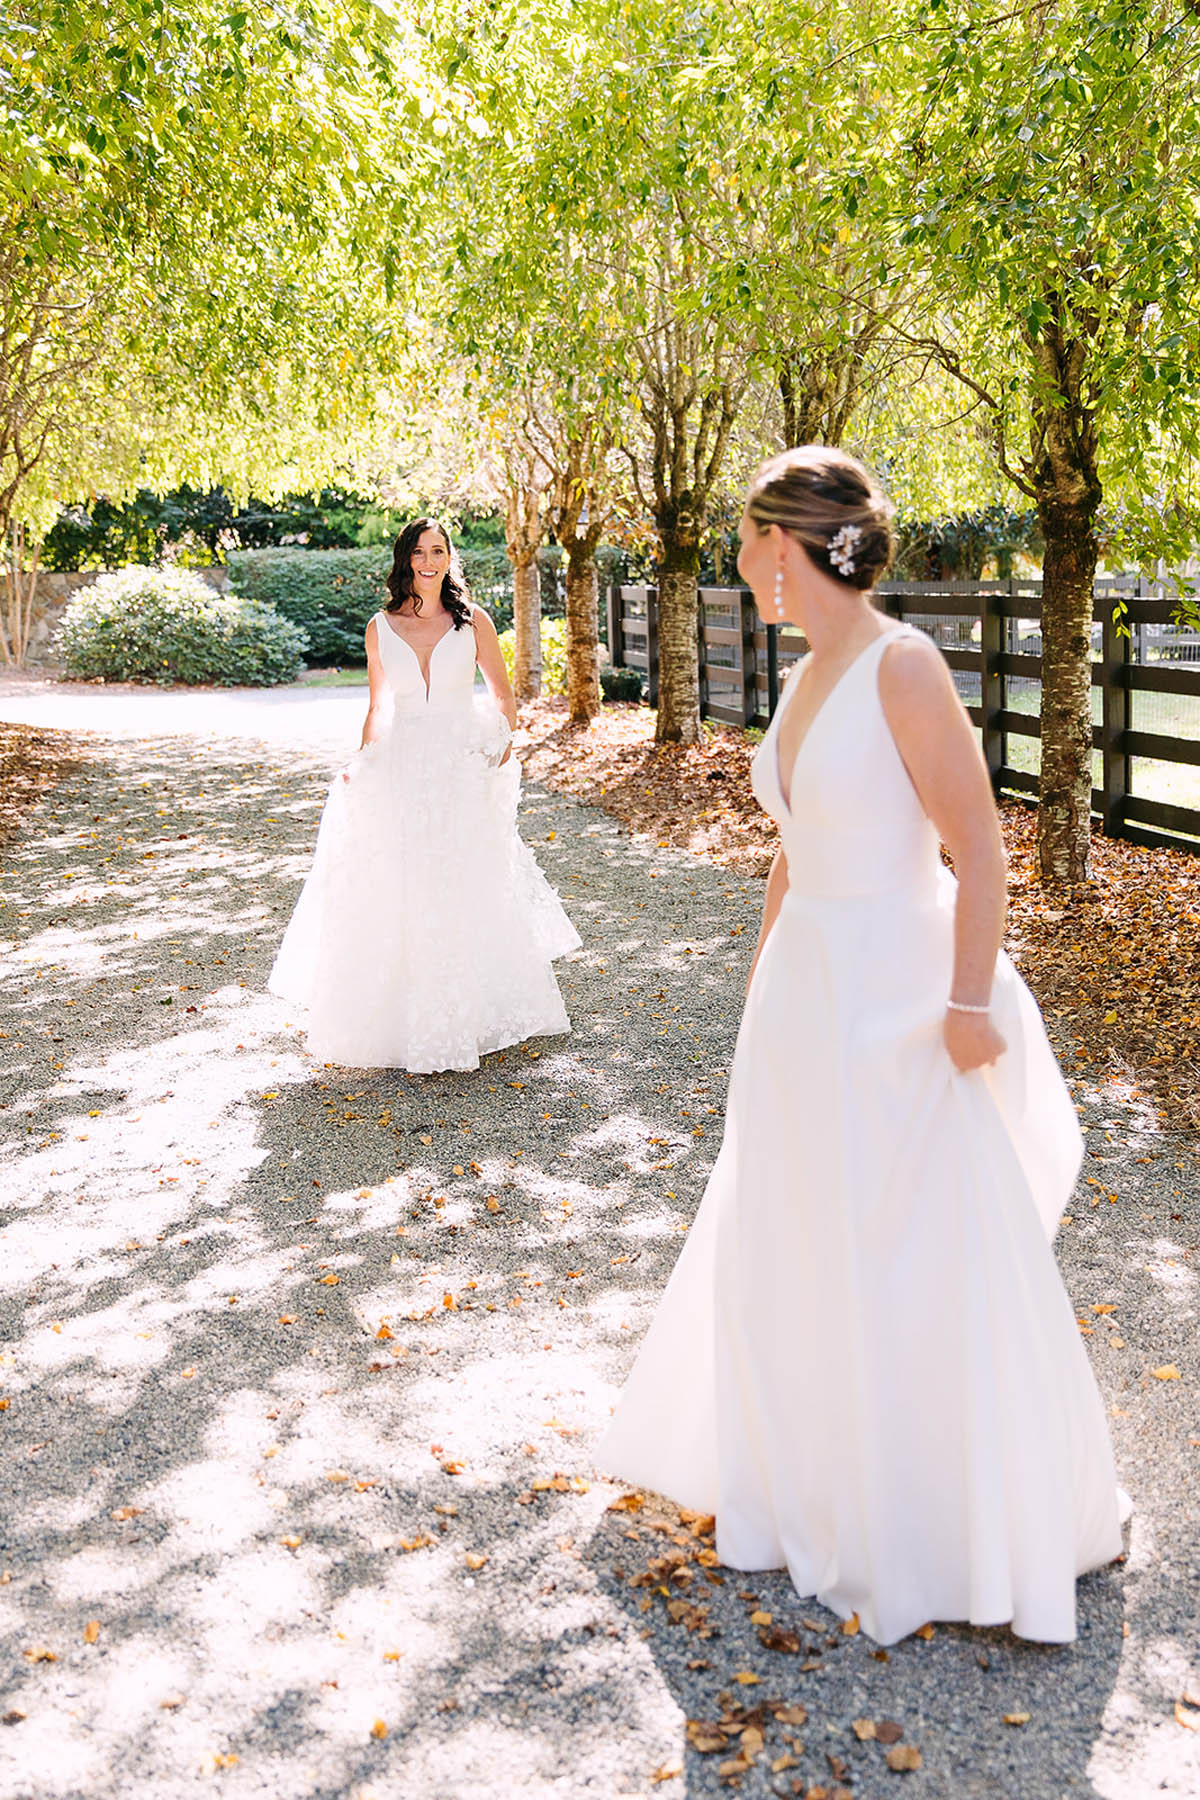 Two brides turn to see each other for a first look.